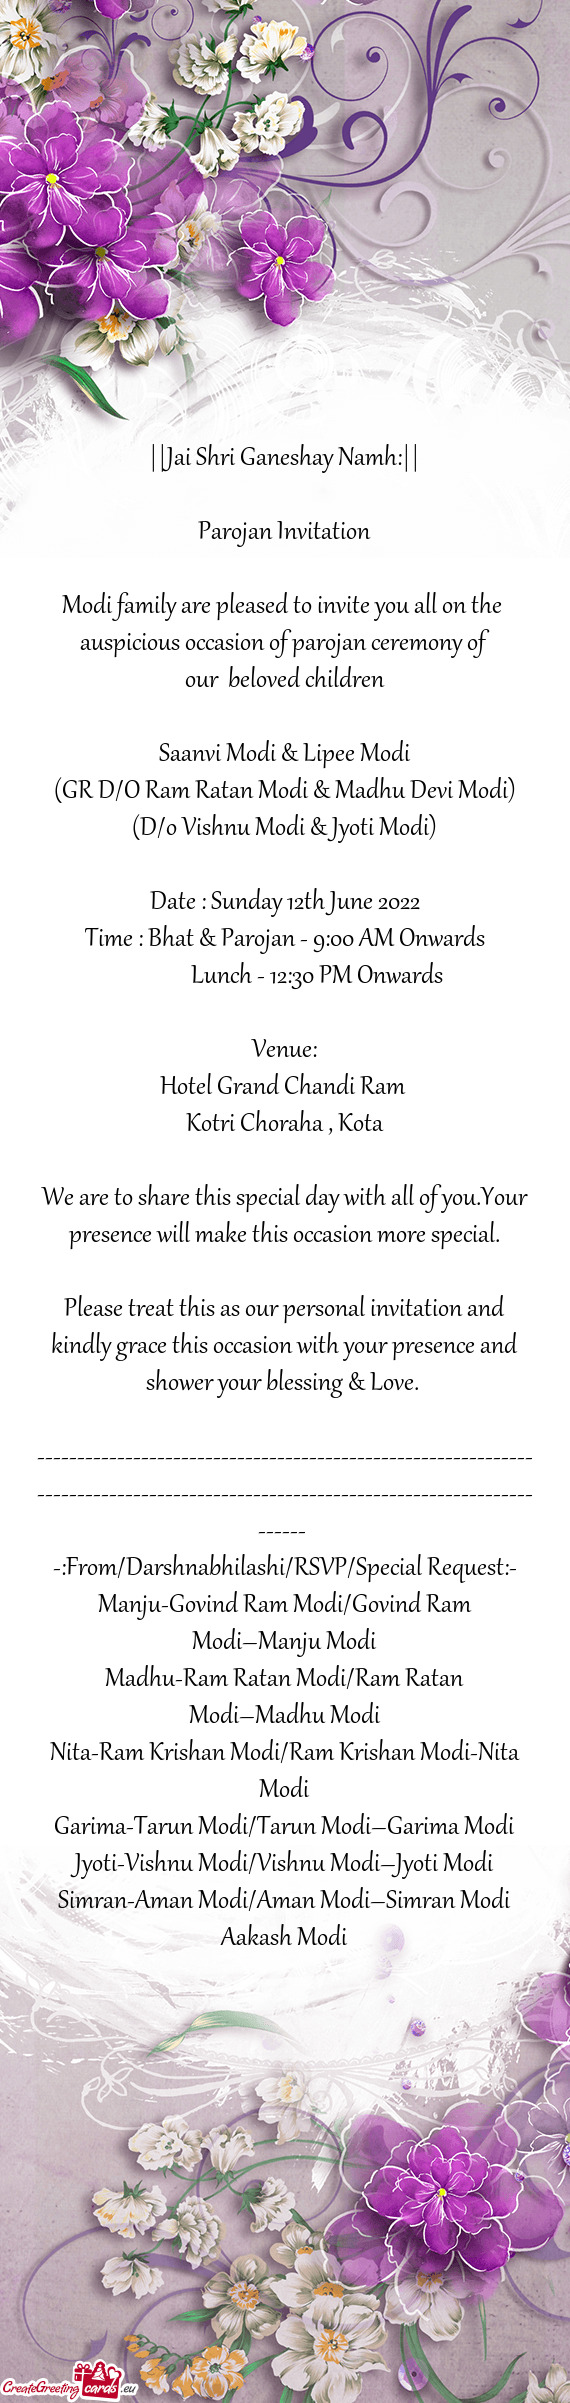 Modi family are pleased to invite you all on the